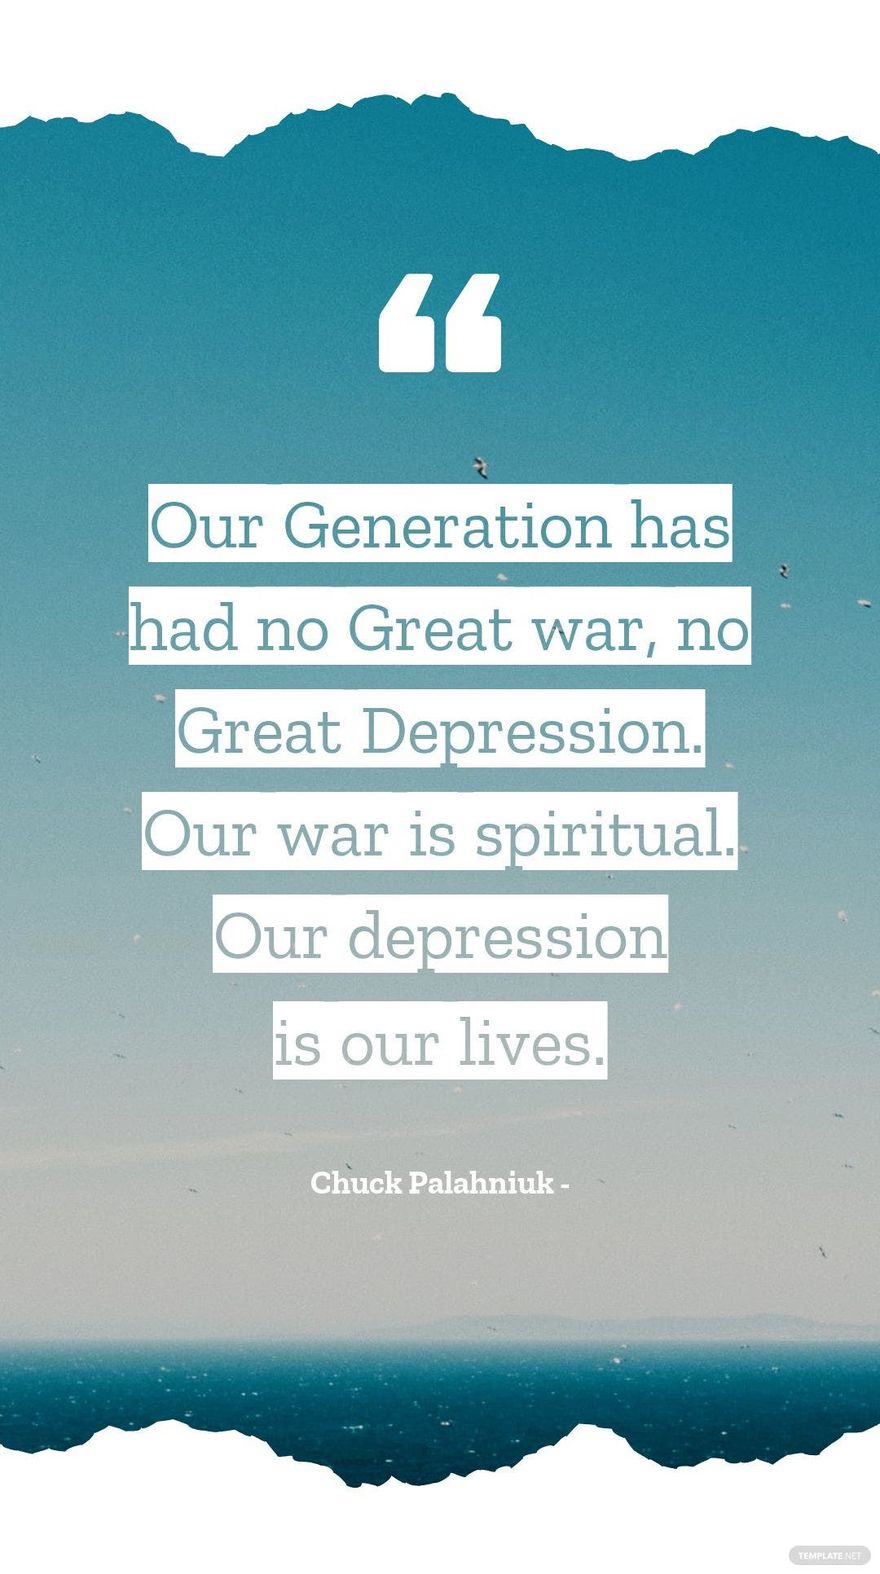 Chuck Palahniuk - Our Generation has had no Great war, no Great Depression. Our war is spiritual. Our depression is our lives.